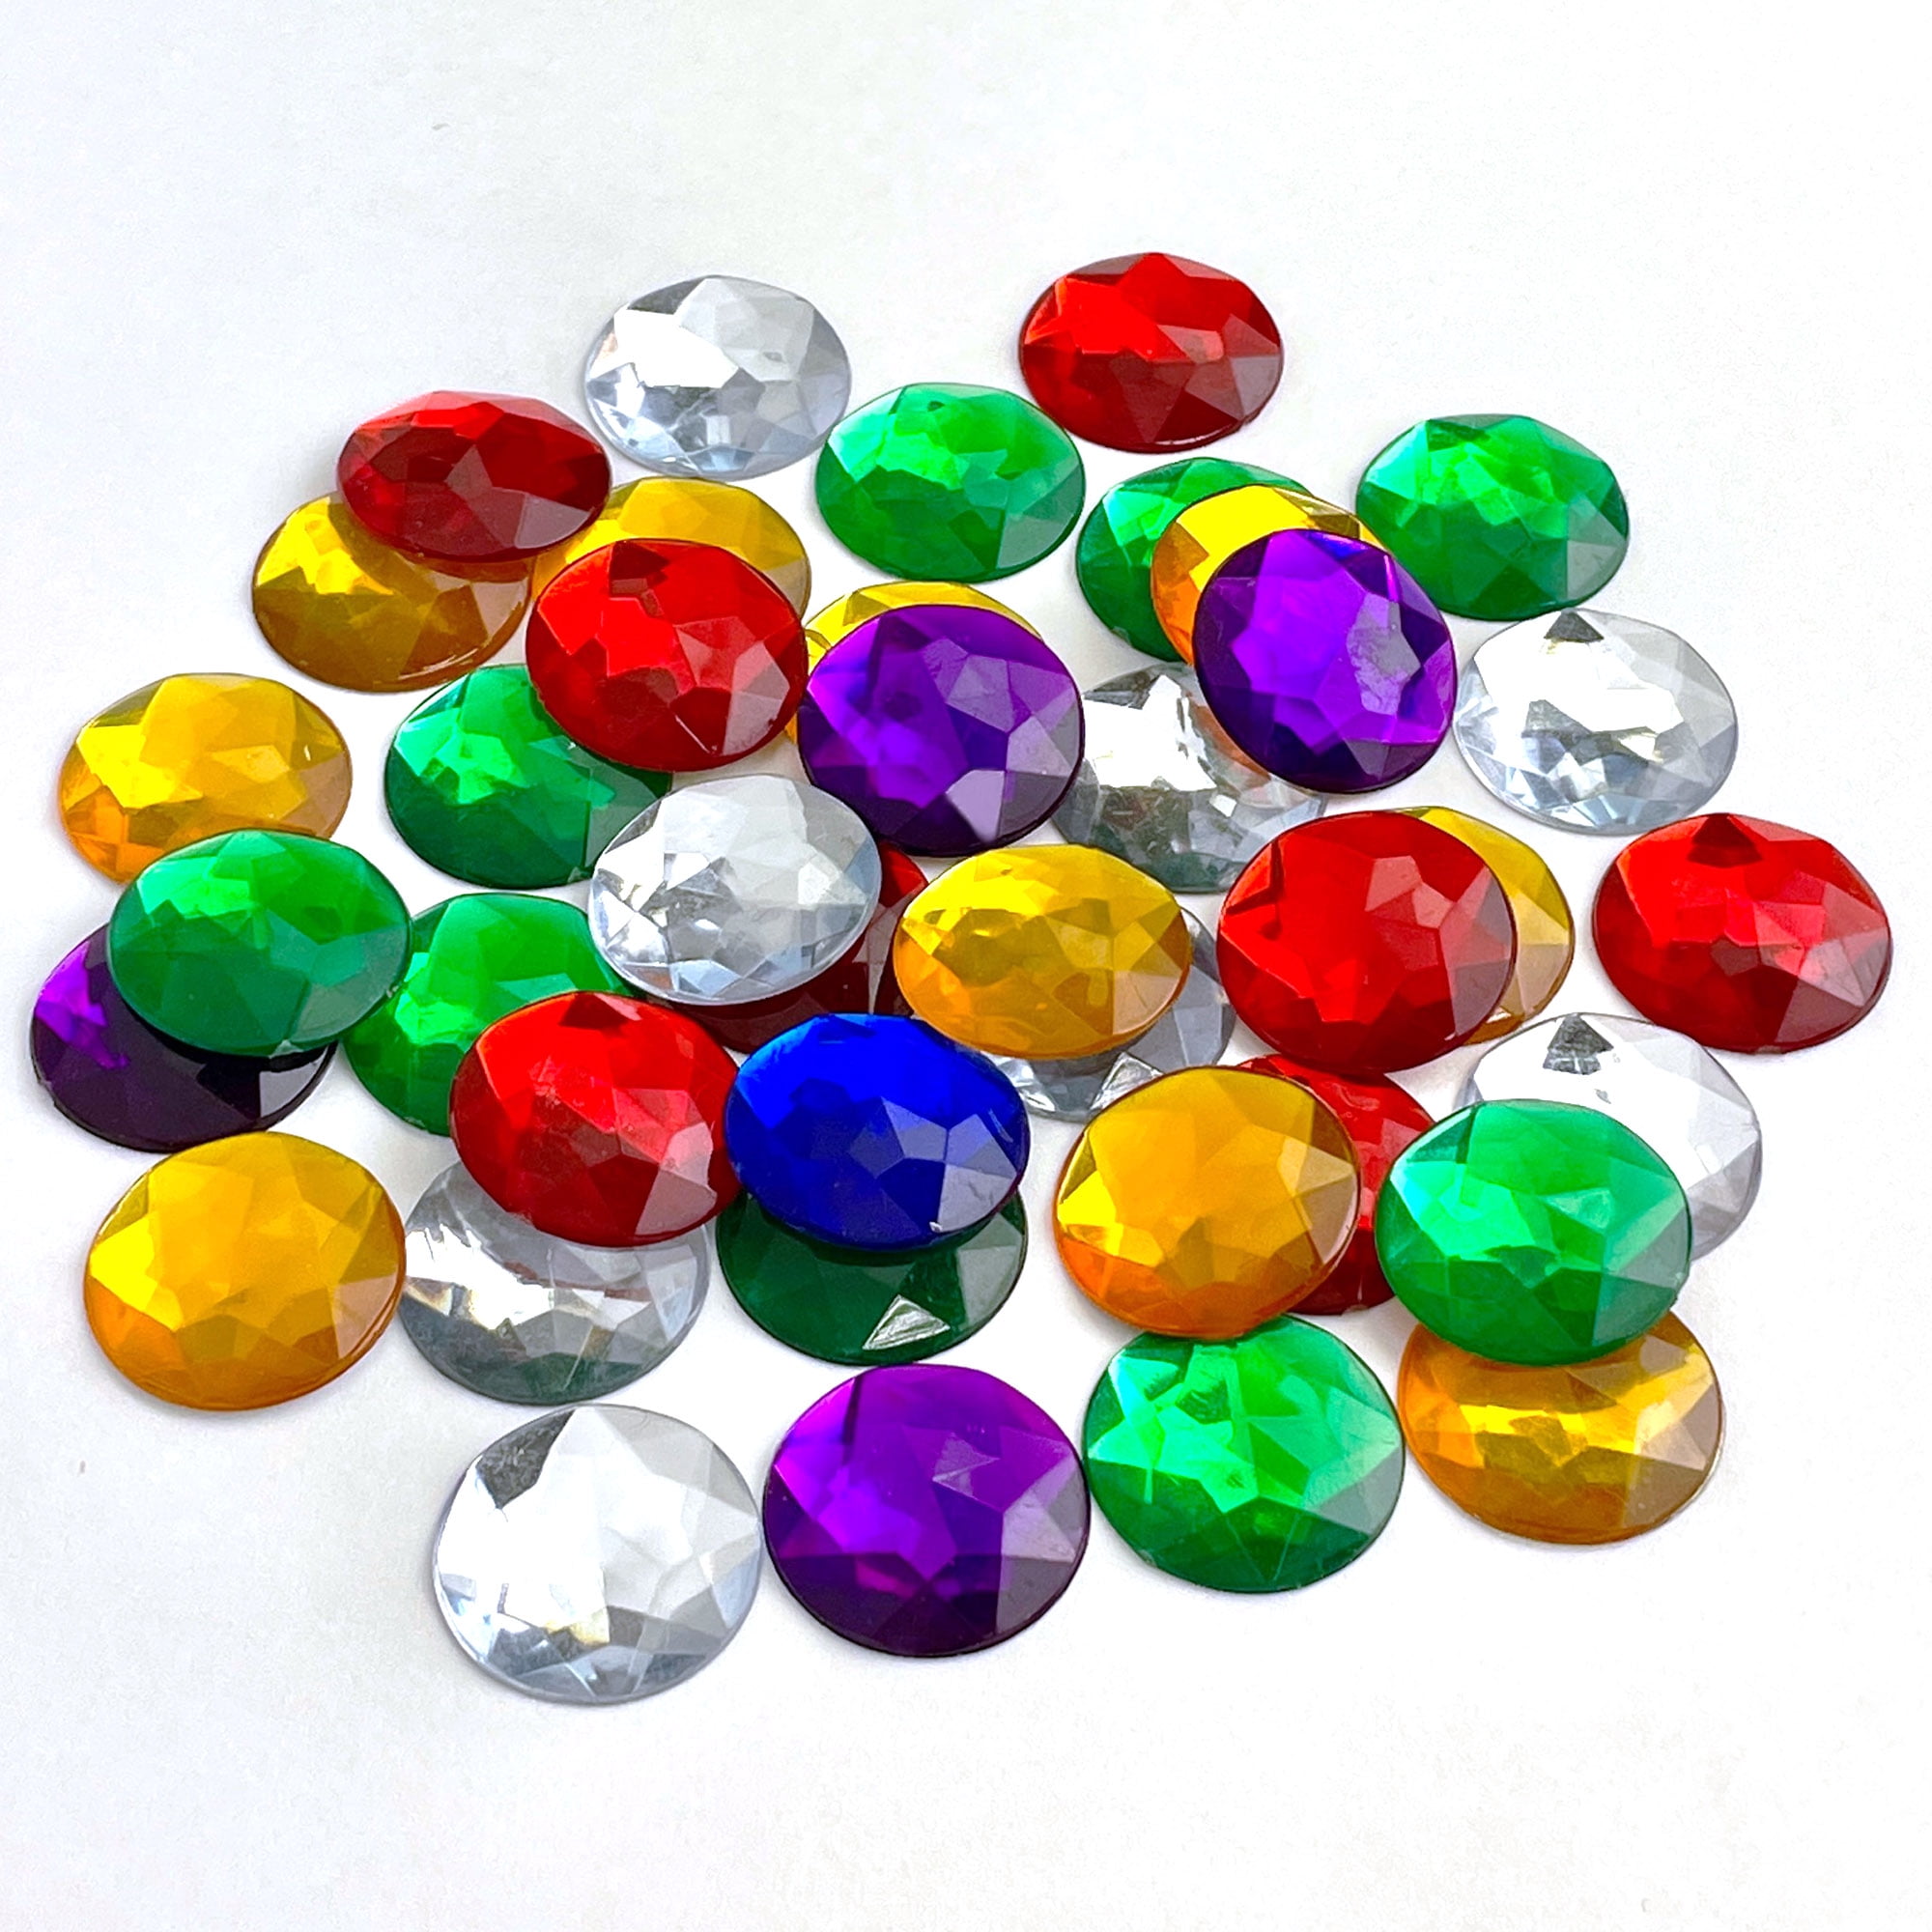 Hello Hobby Flat Back Rhinestones, Loose Gemstones in Assorted Shapes and  Colors, 0.7 oz.